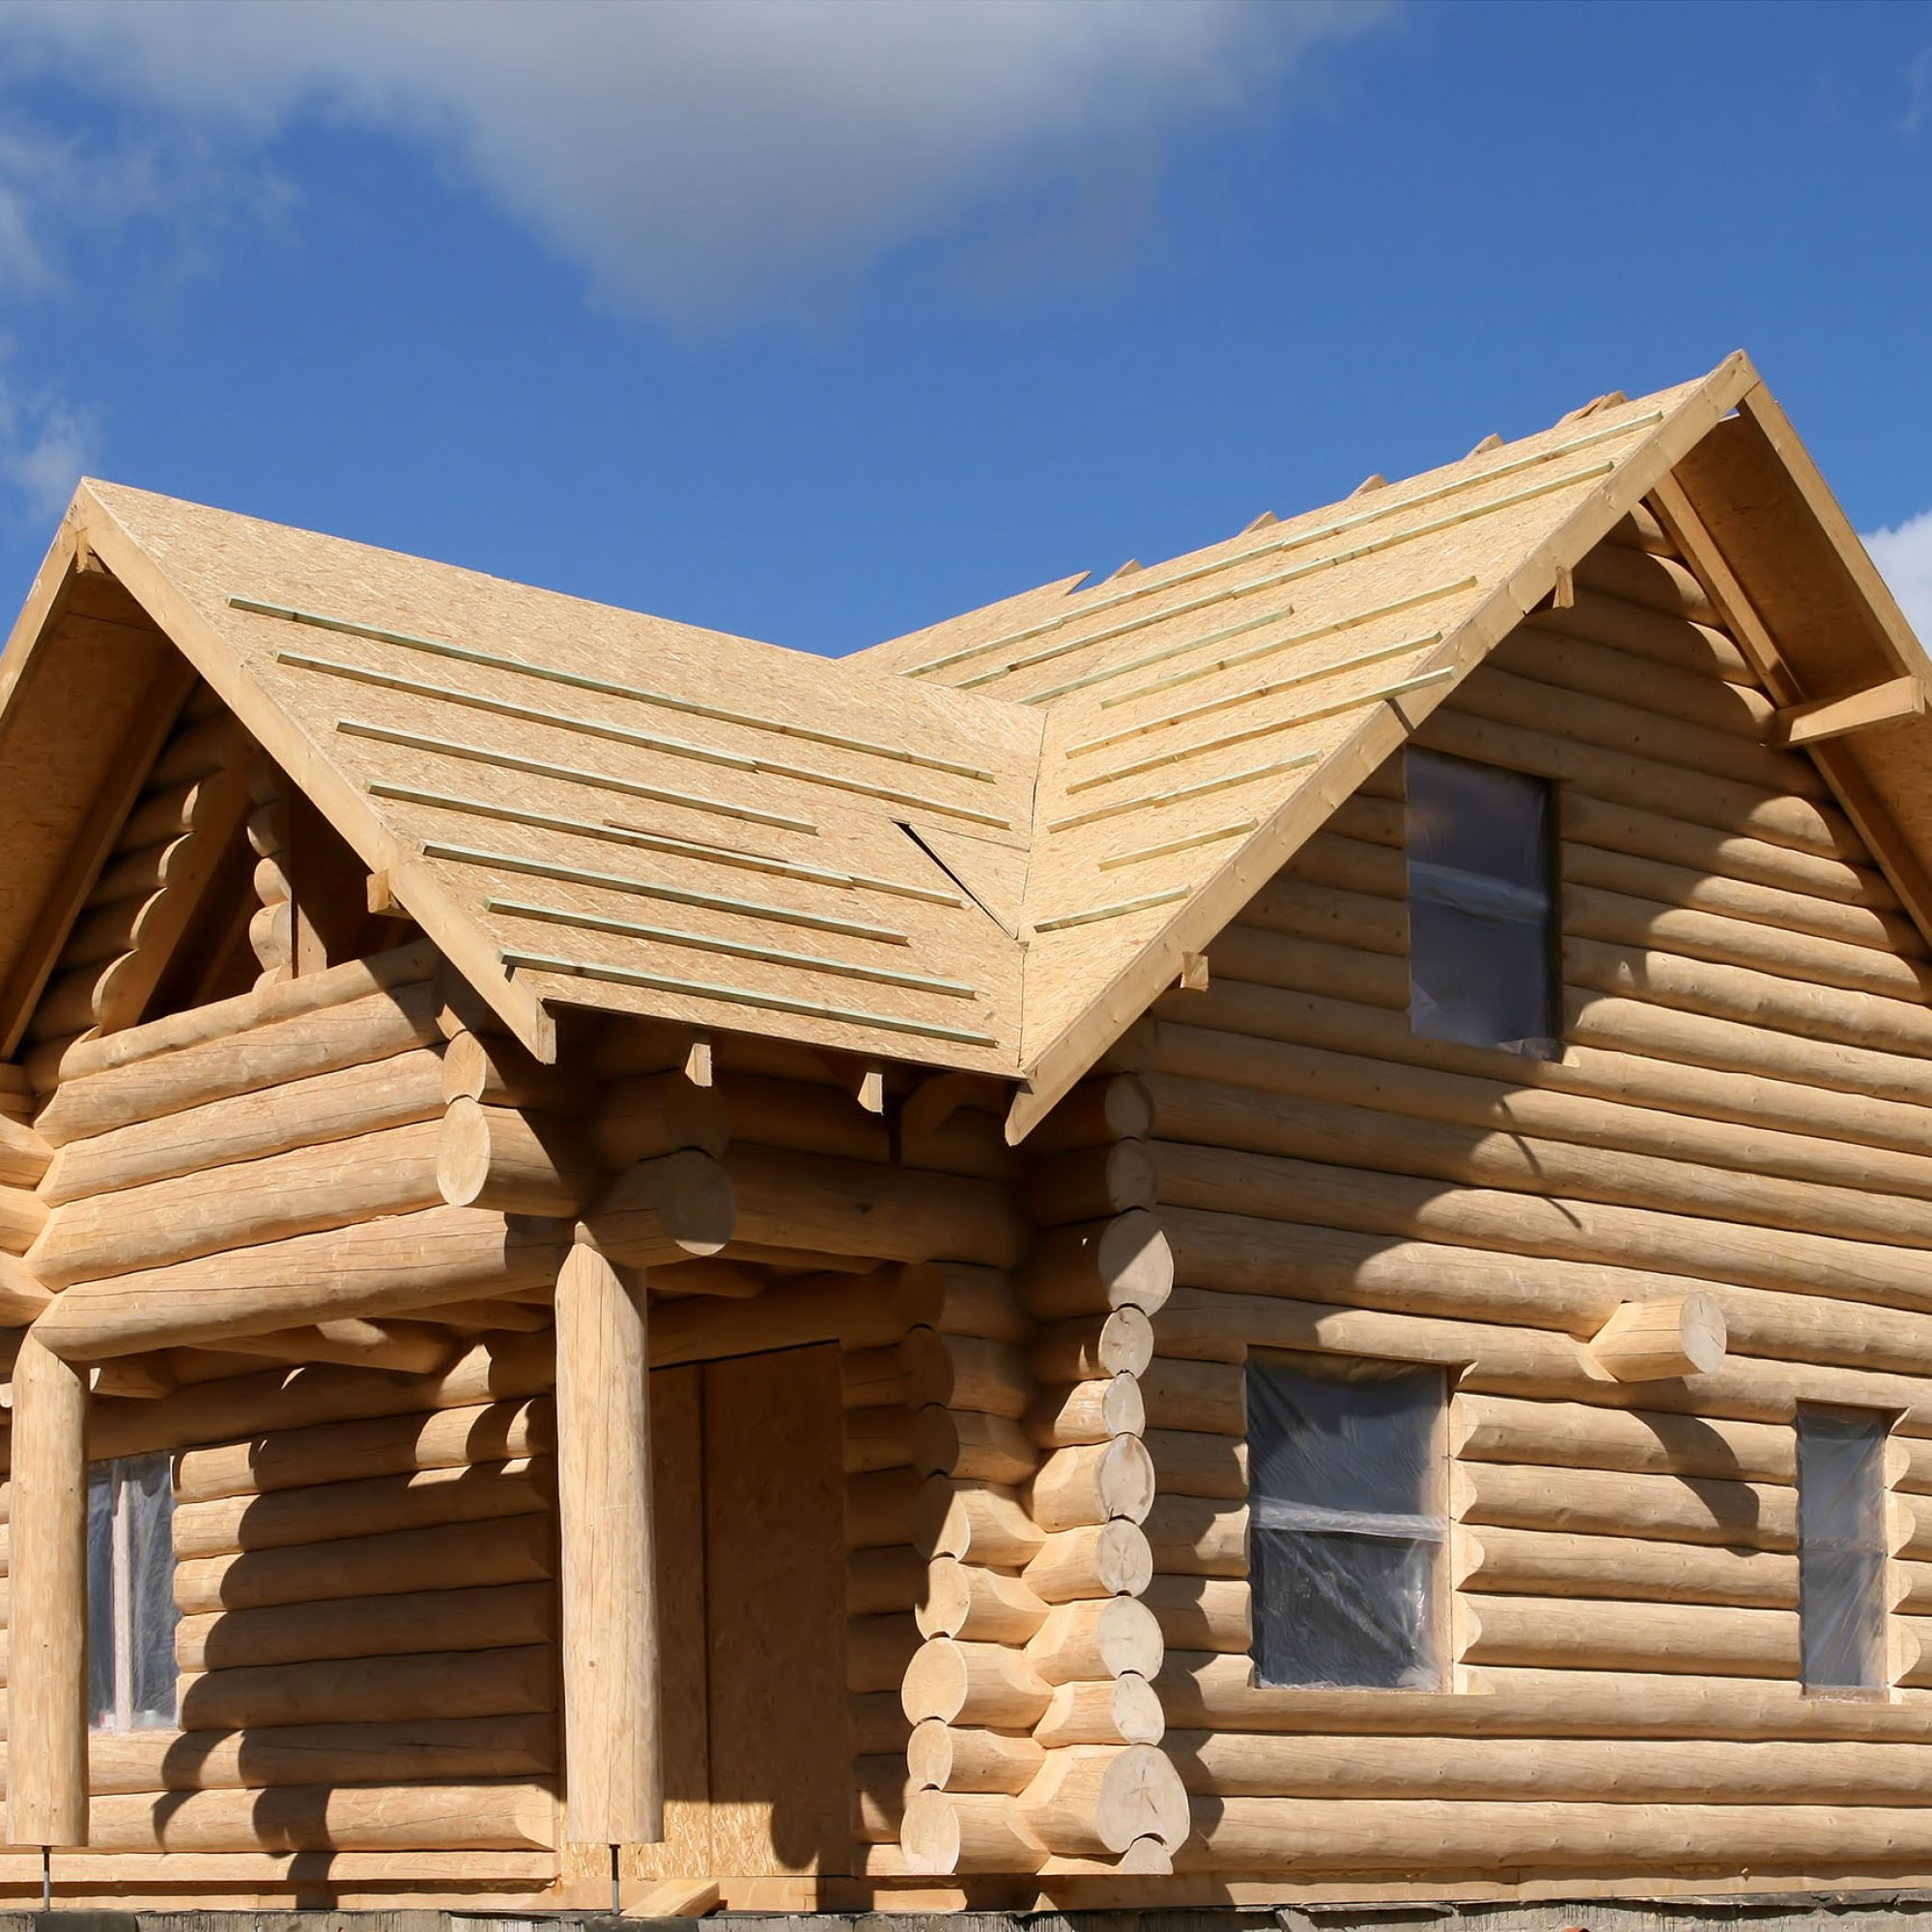 Wooden house construction. Residential architecture. Environment friendly building.